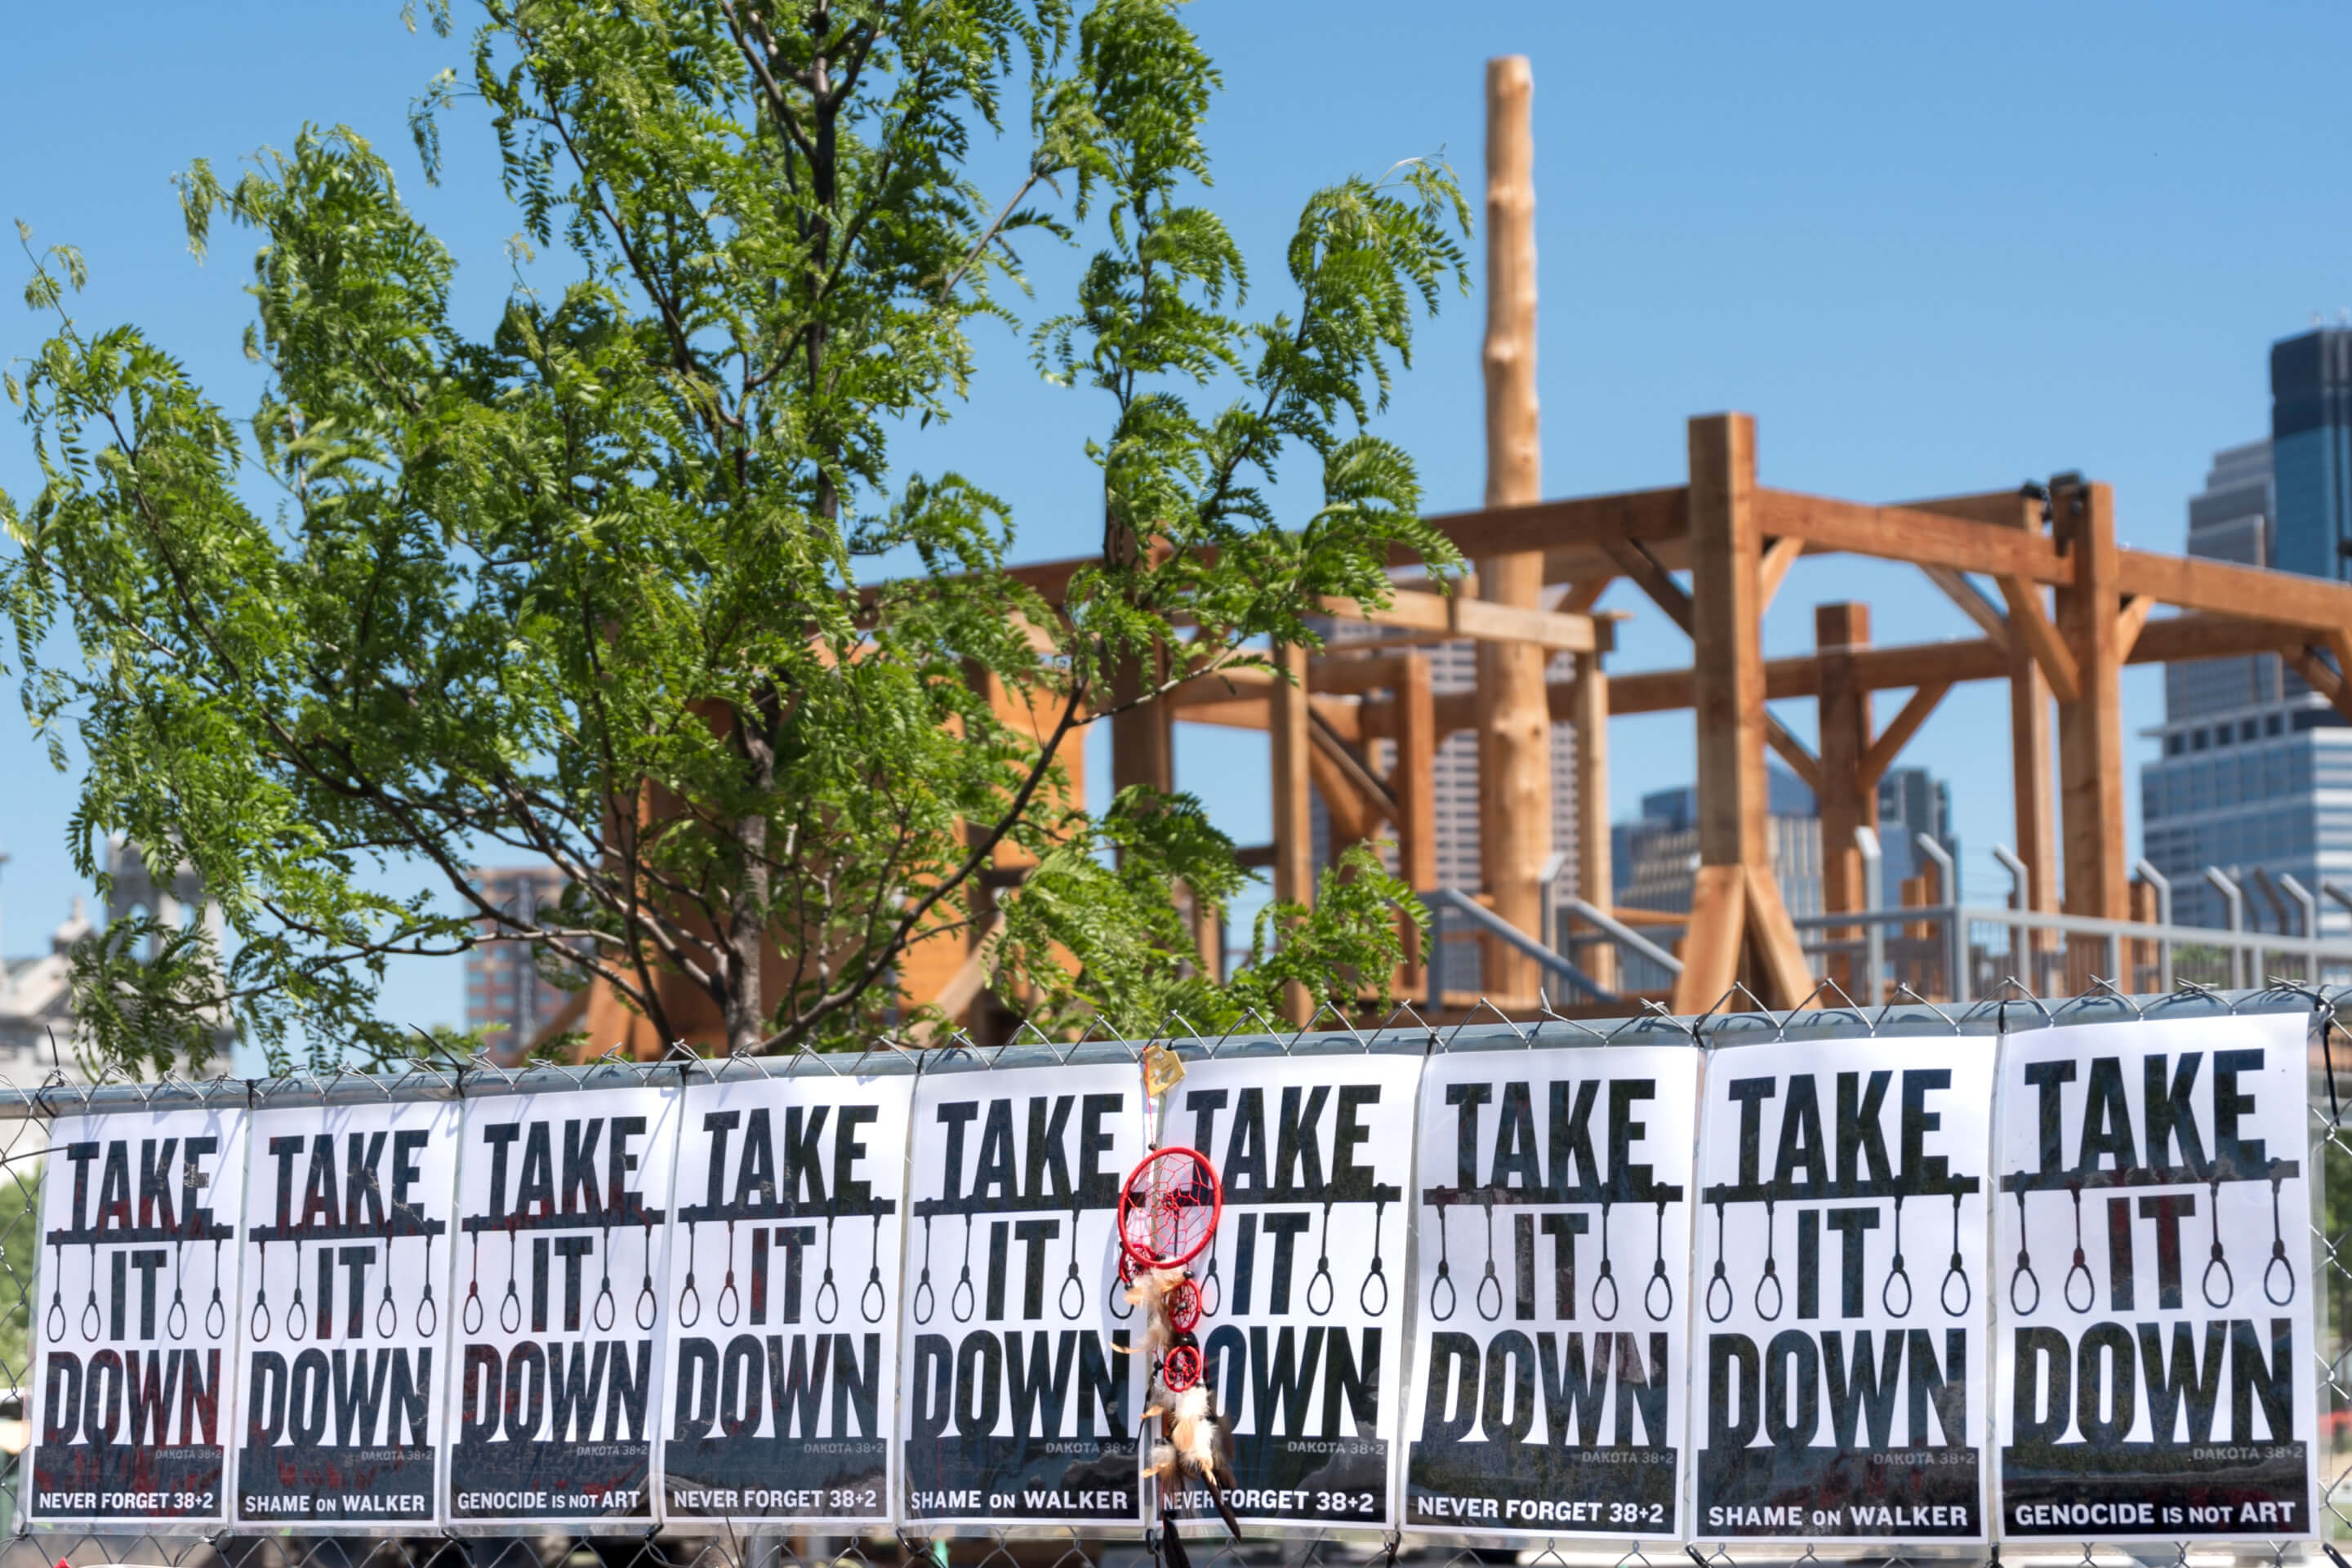 Scaffolding installation with TAKE IT DOWN signs and nooses strung along a fence